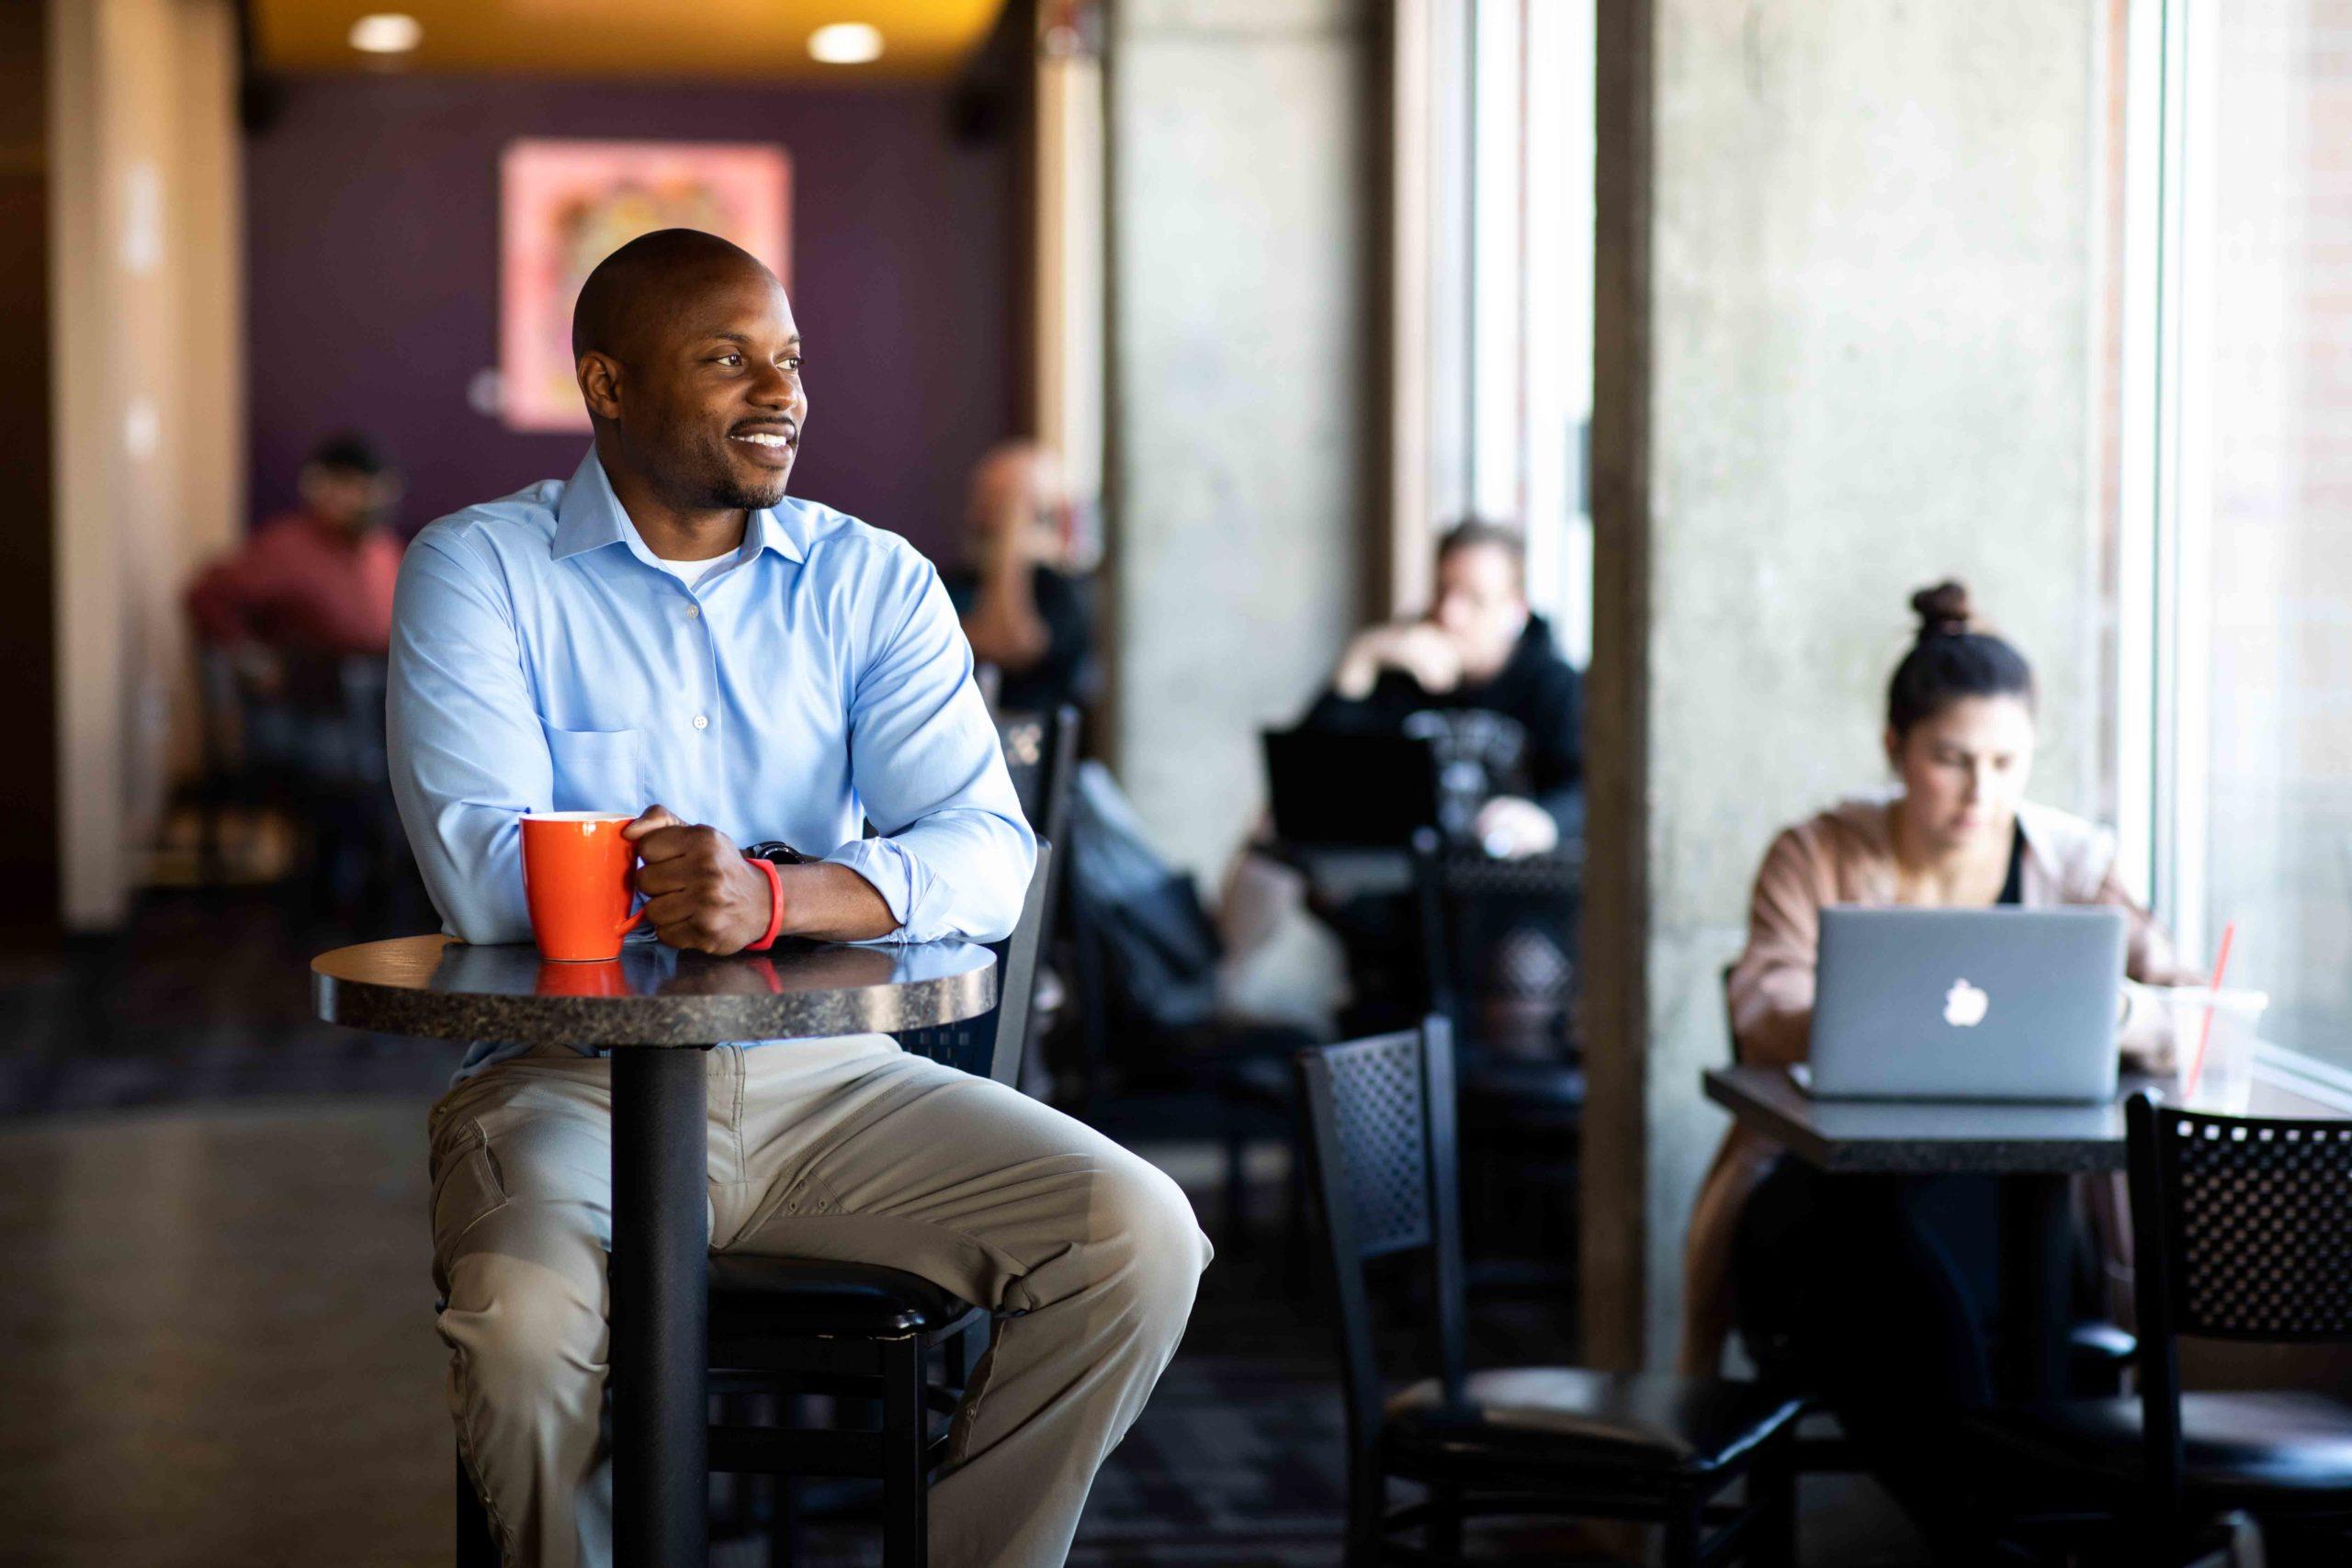 MSU Denver Grad Ryan Cobbins sitting in a coffee shop with a mug in his hand, looking out the window.